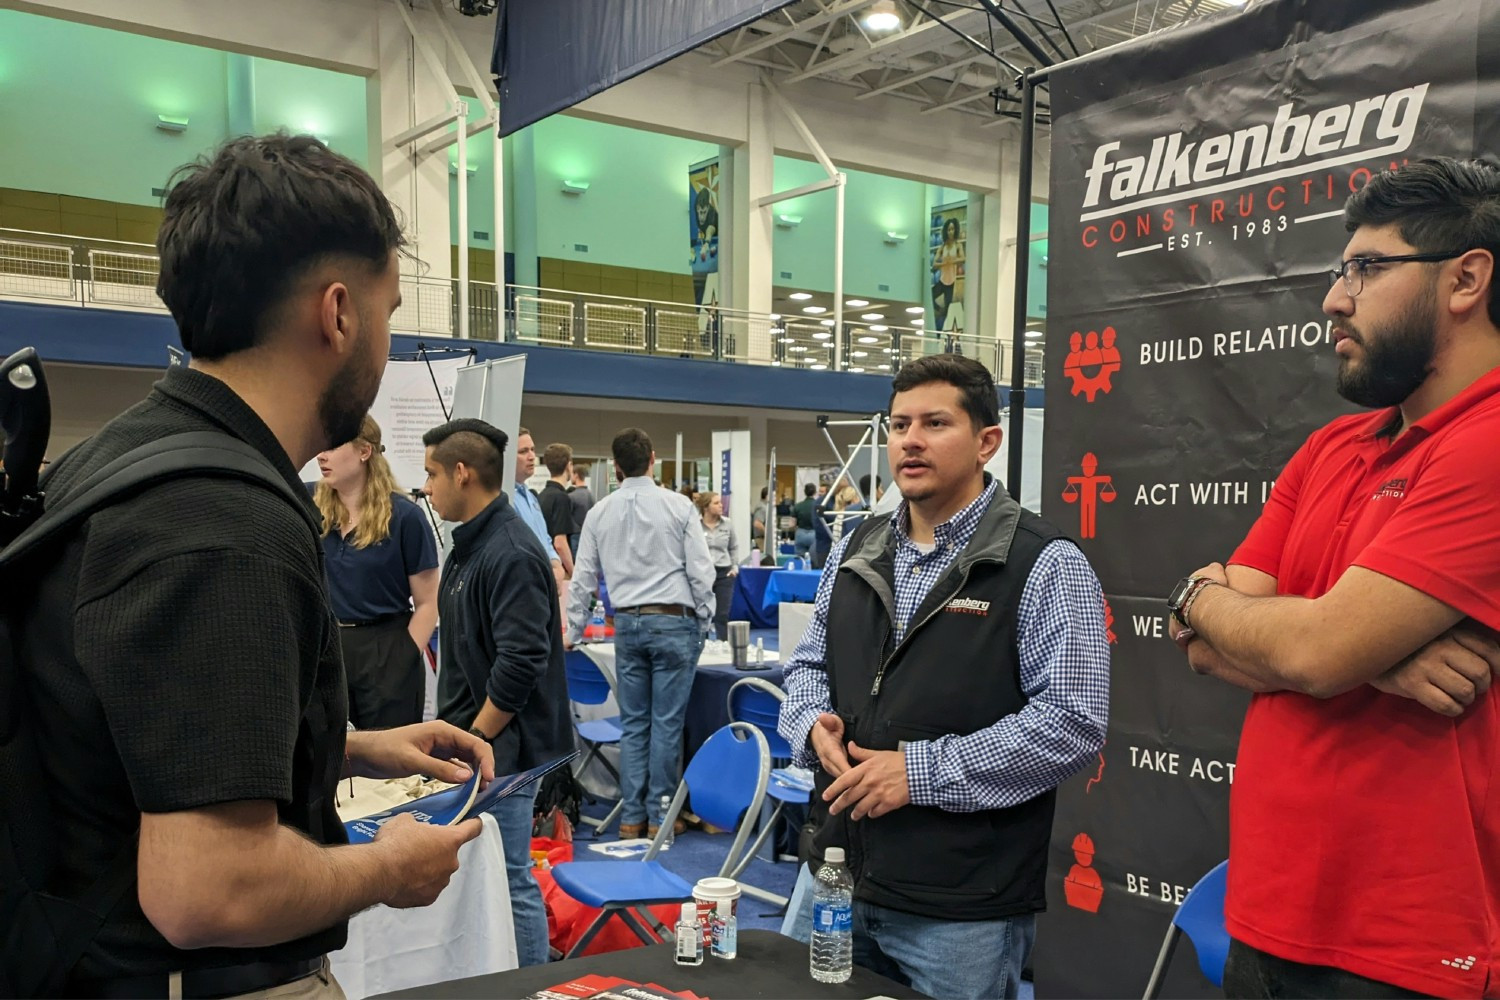 Jose and Andres proudly representing Falkenberg Construction at the UTA Engineering Career Fair.